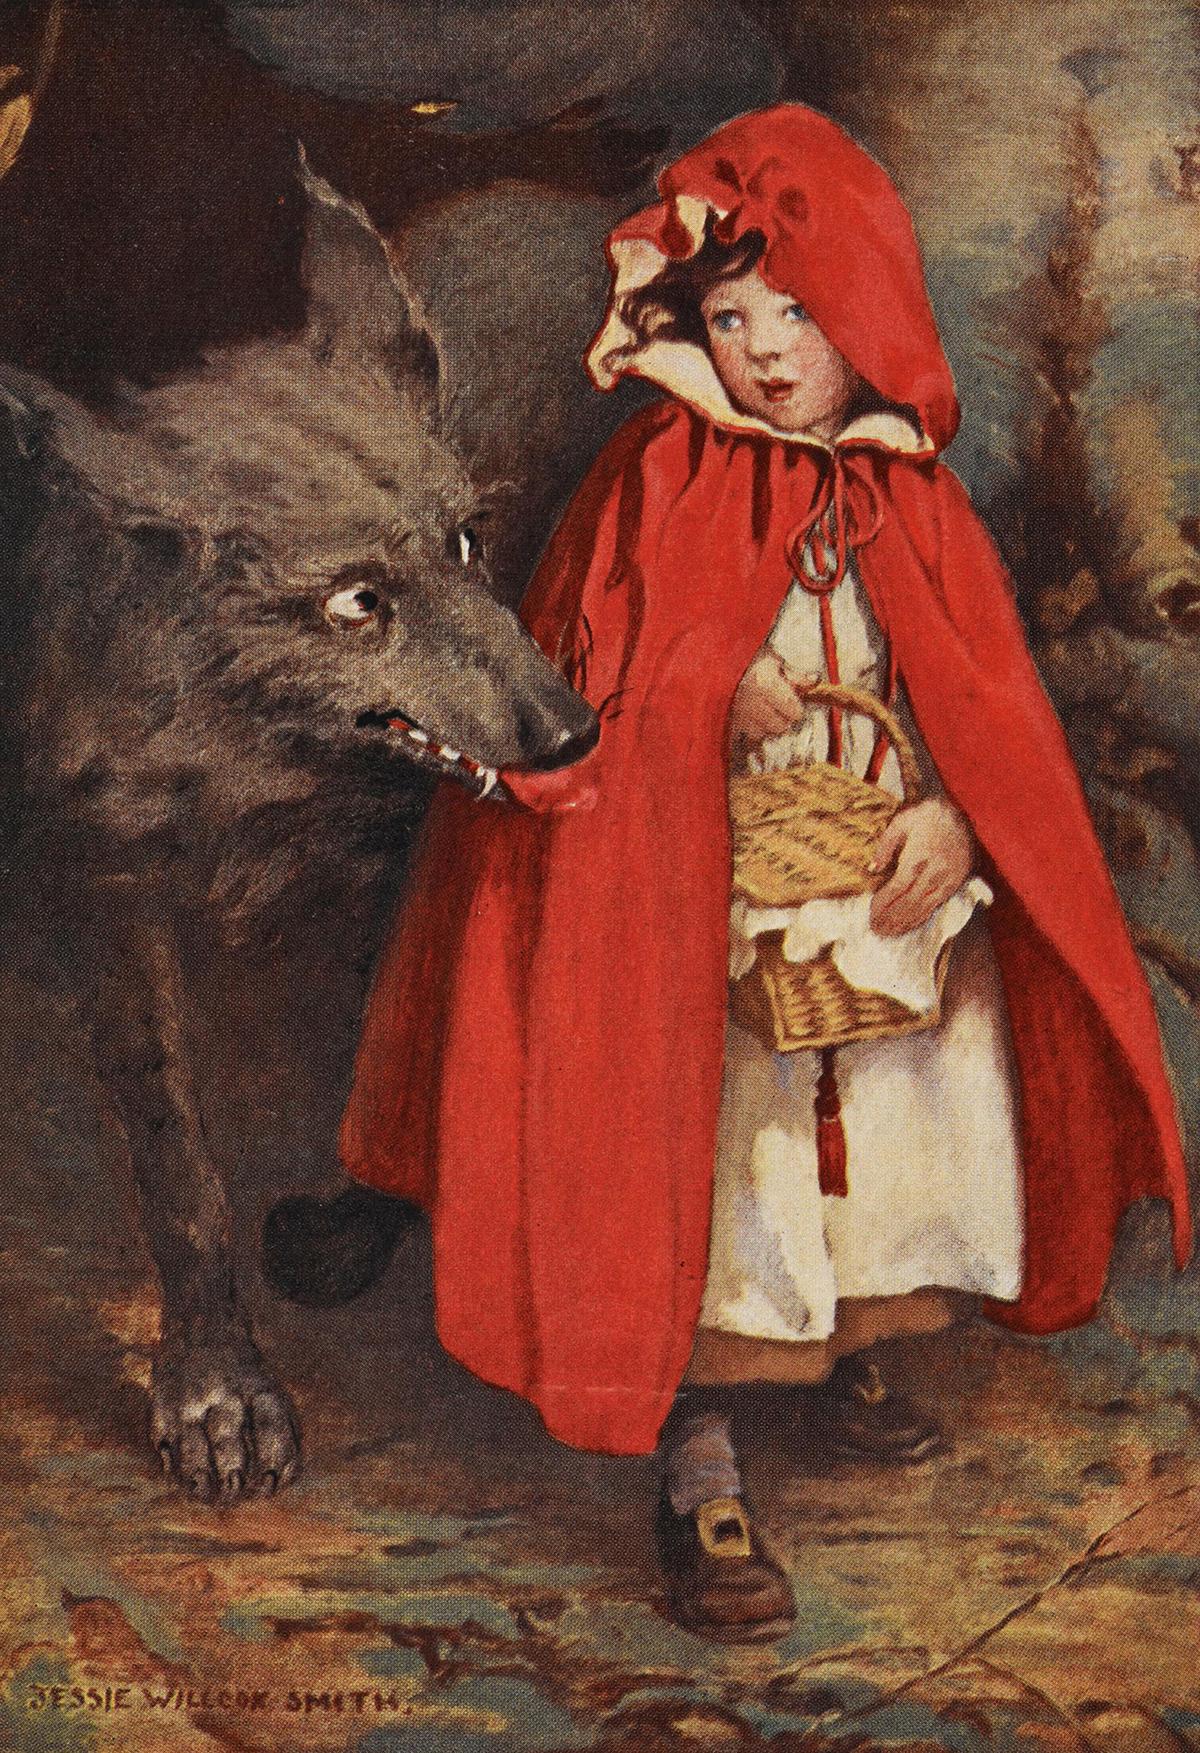 An Illustrated plate of "Little Red Riding Hood," 1911, by Jessie Willcox Smith from the book "A Child's Book of Stories." (Public Domain)